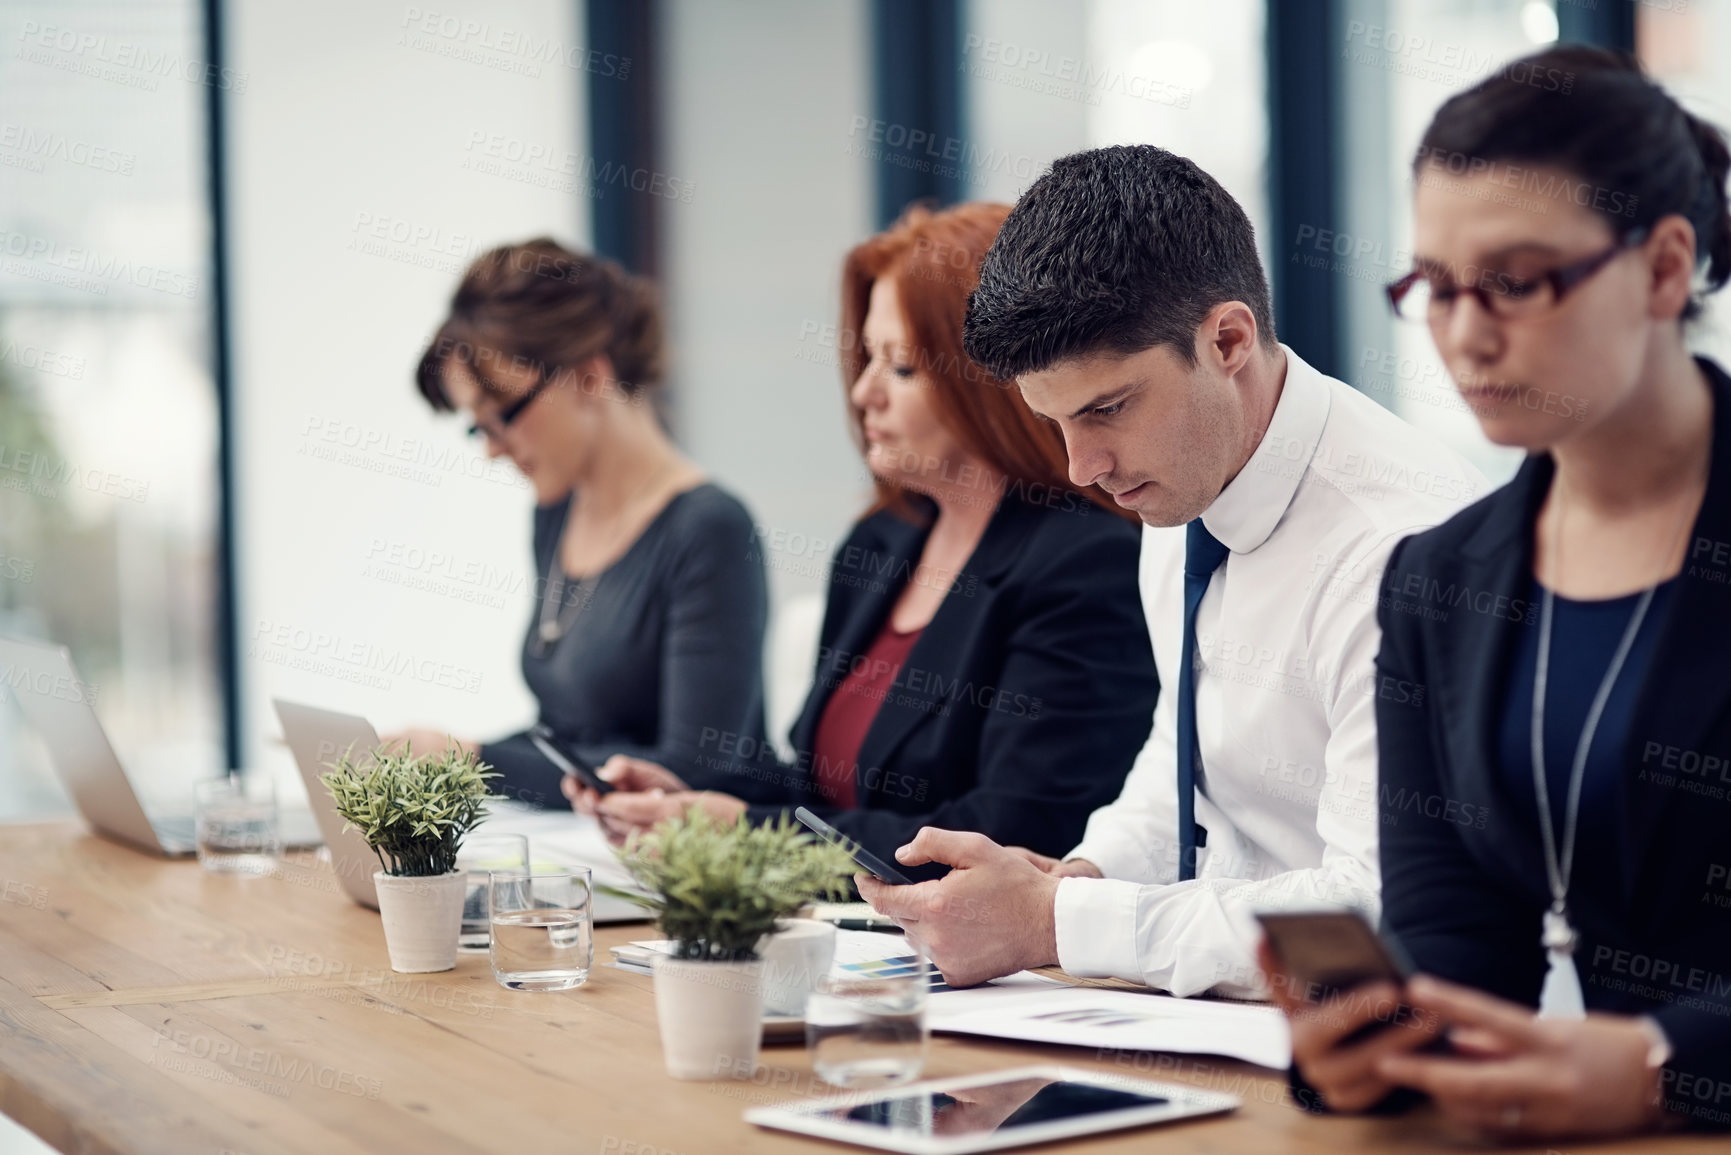 Buy stock photo Cropped shot of a group of businesspeople texting on their cellphones in an office